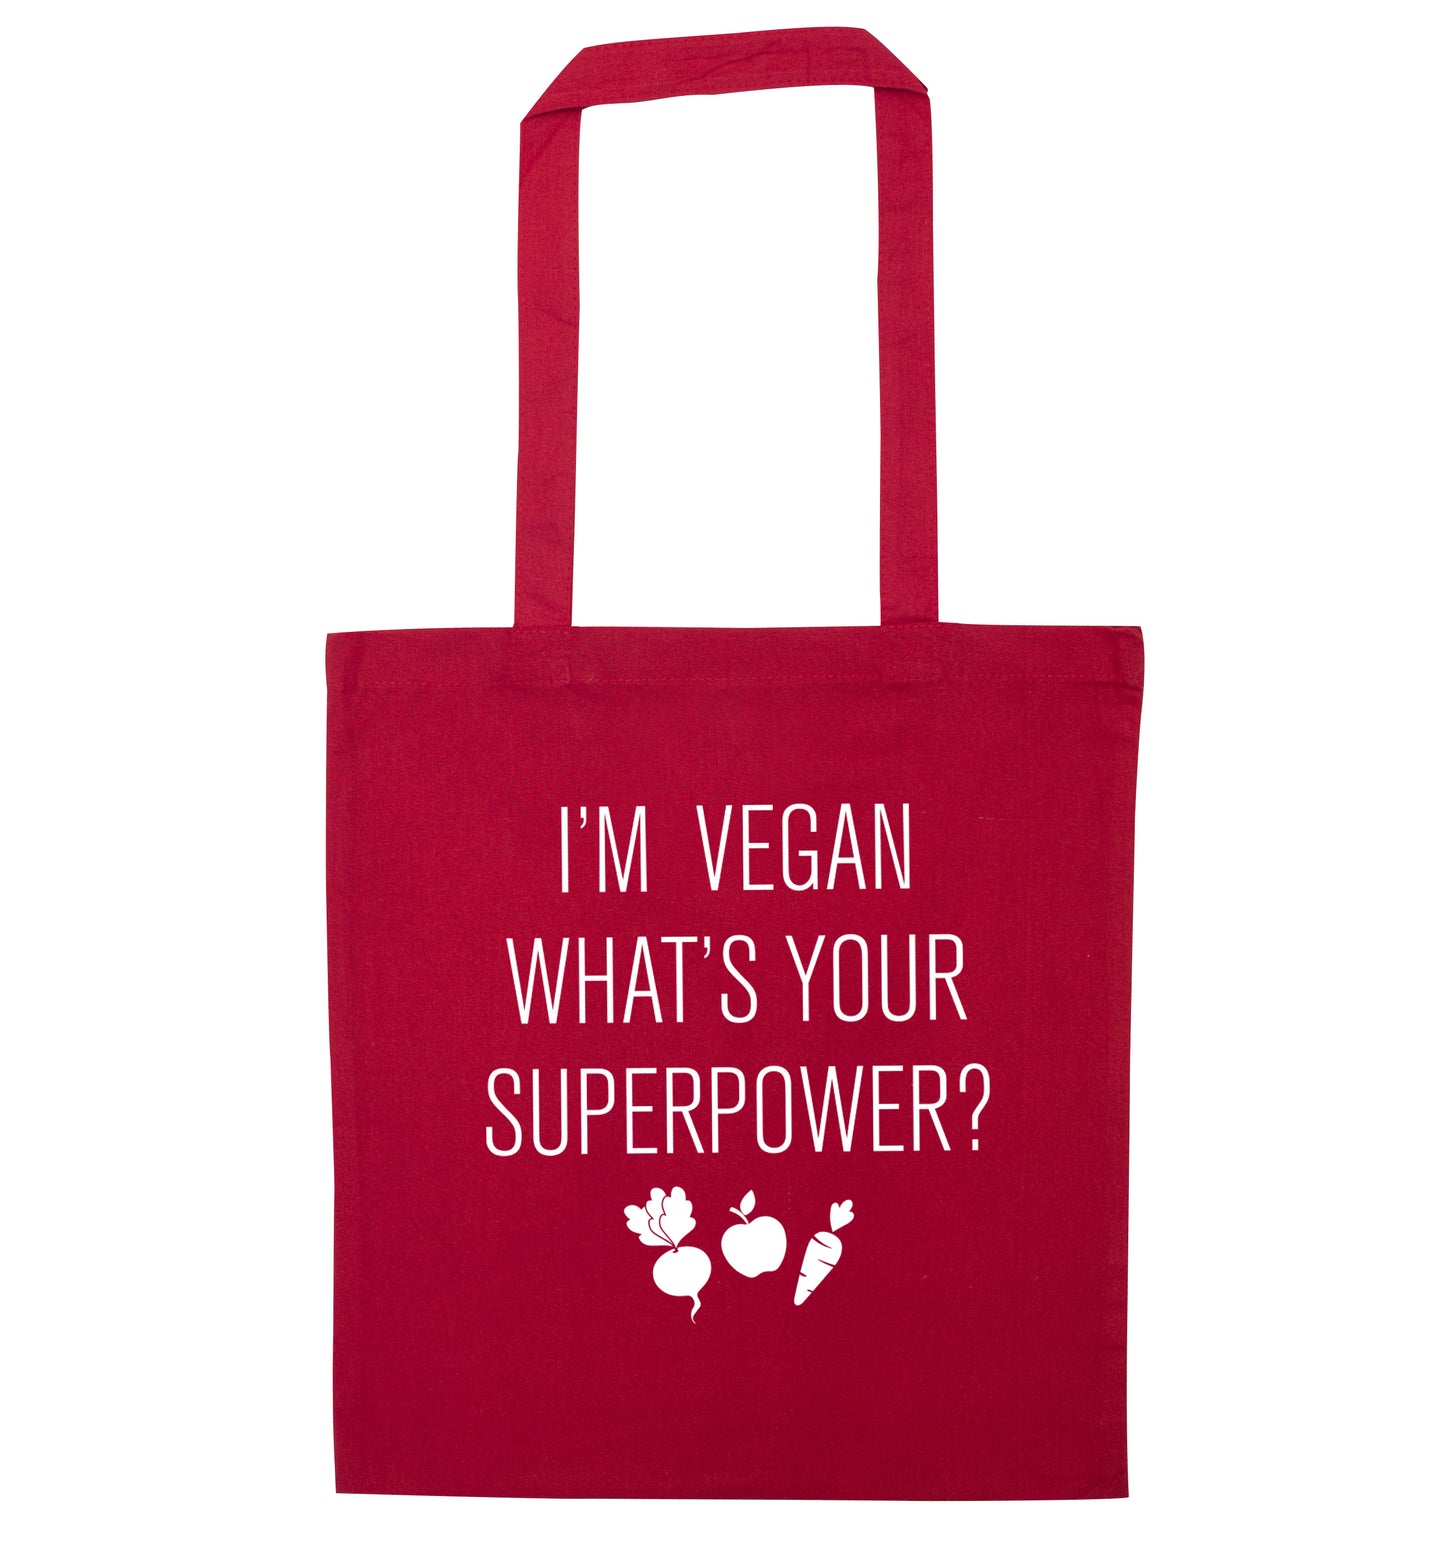 I'm Vegan What's Your Superpower? red tote bag